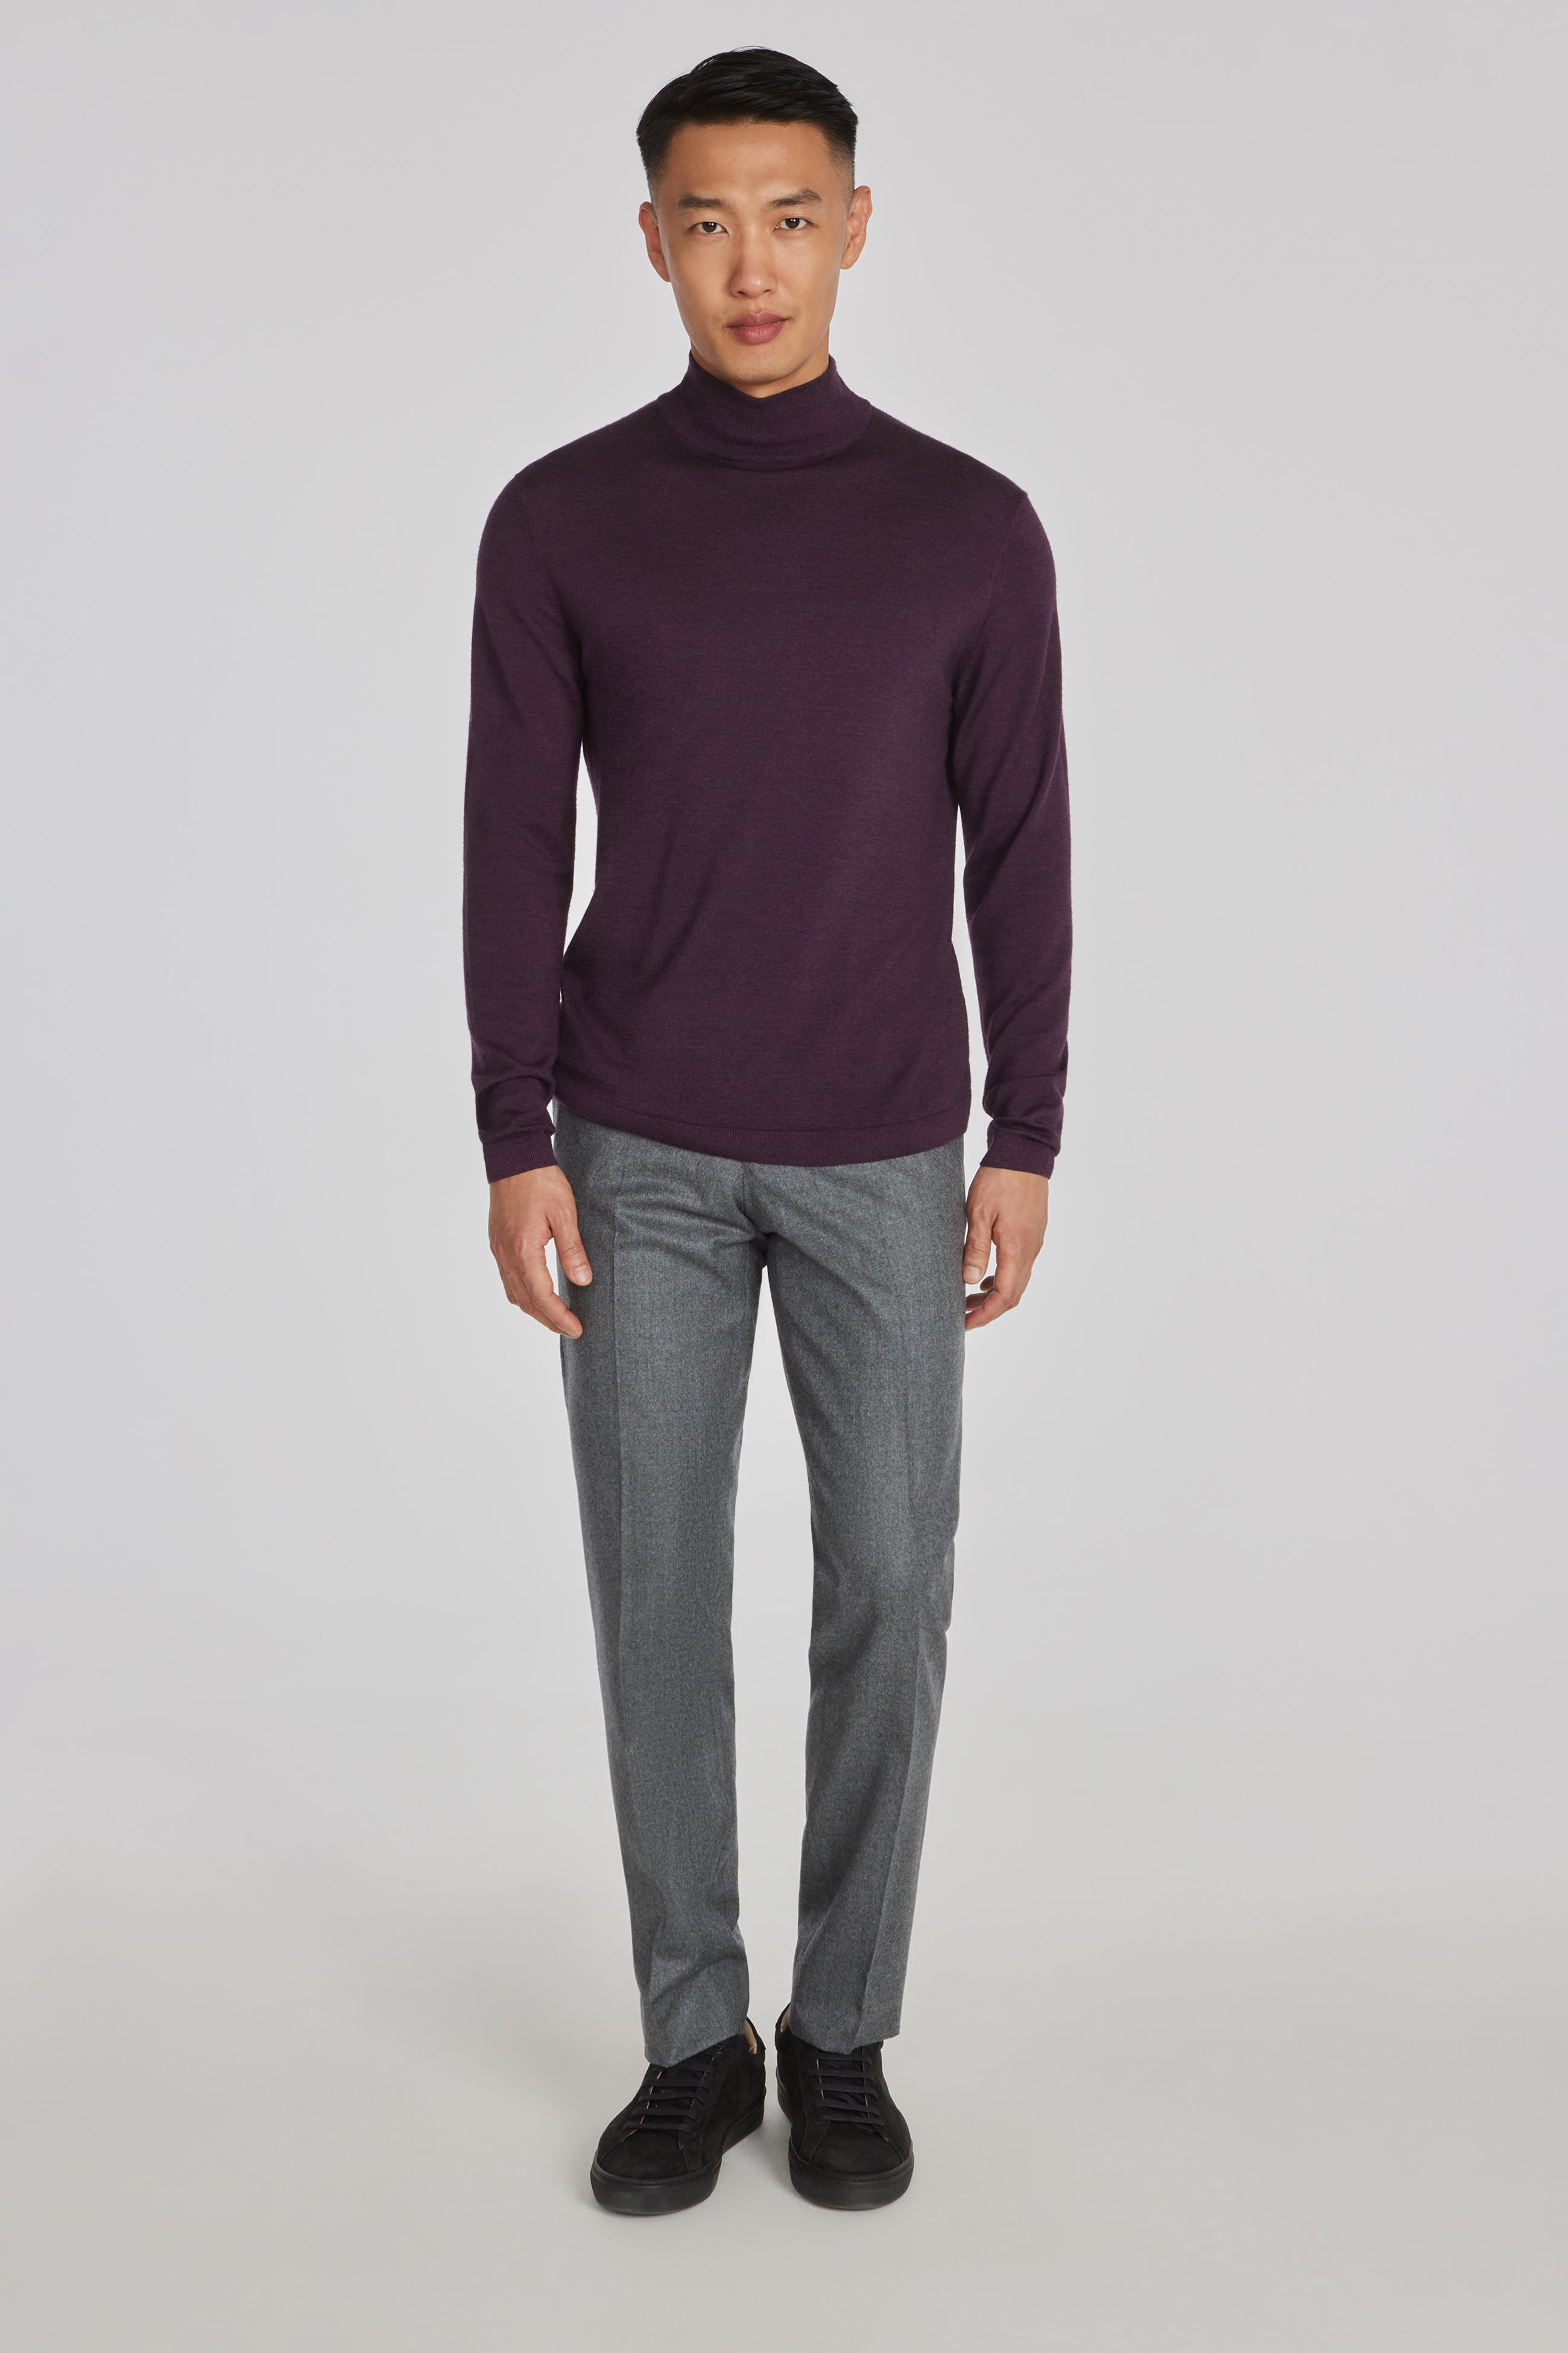 Beaudry Plum Wool, Silk and Cashmere Mock Neck Sweater